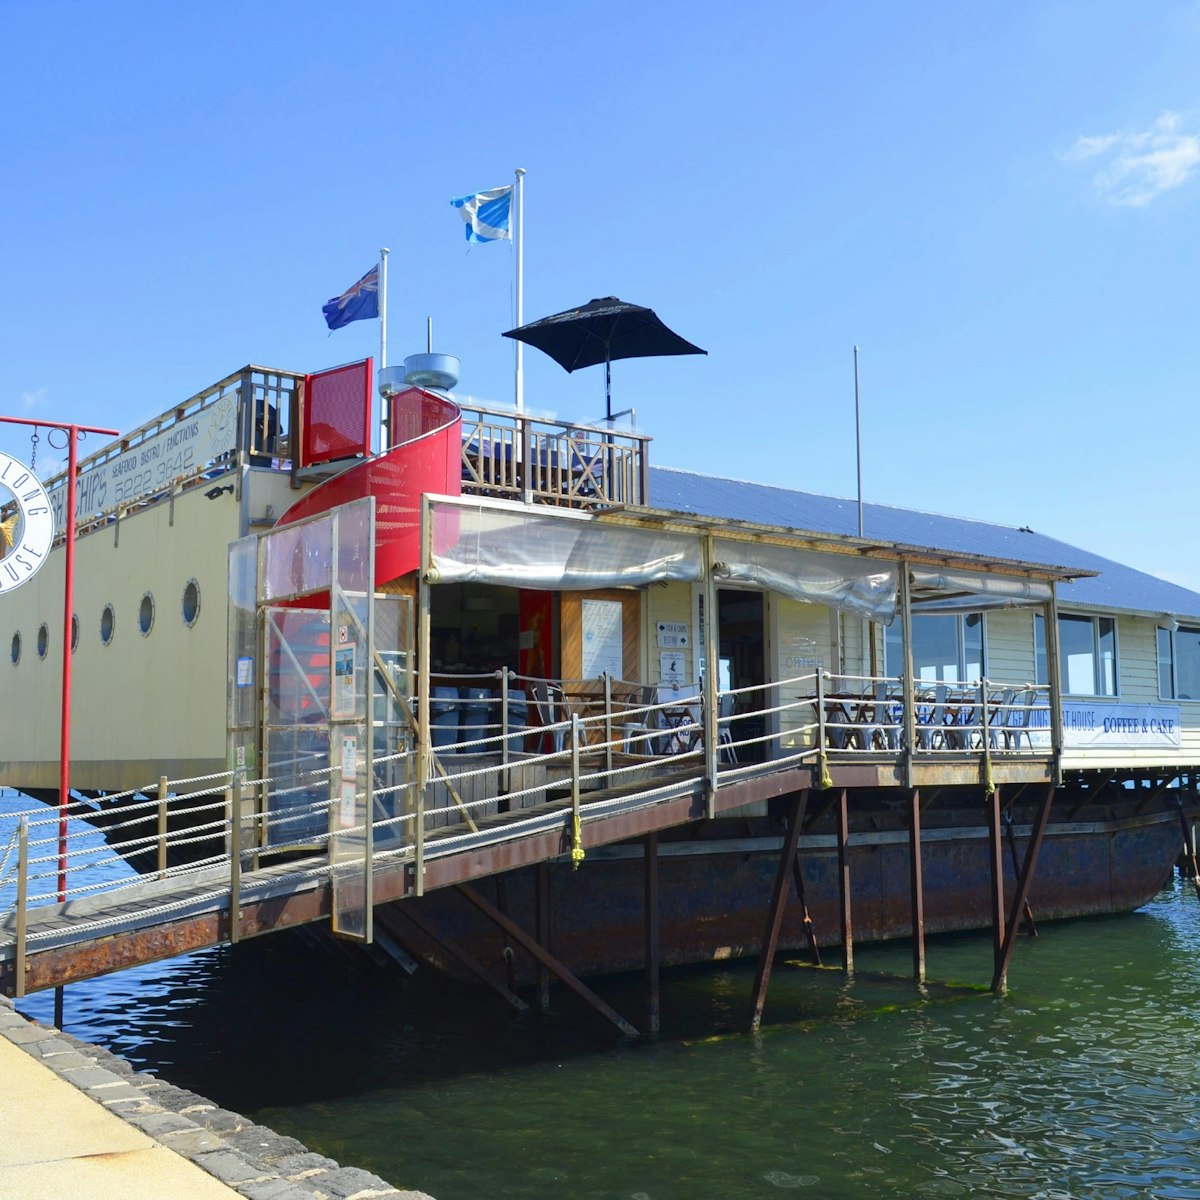 Exterior of the Geelong Boat House fish and chip restaurant on the waterfront